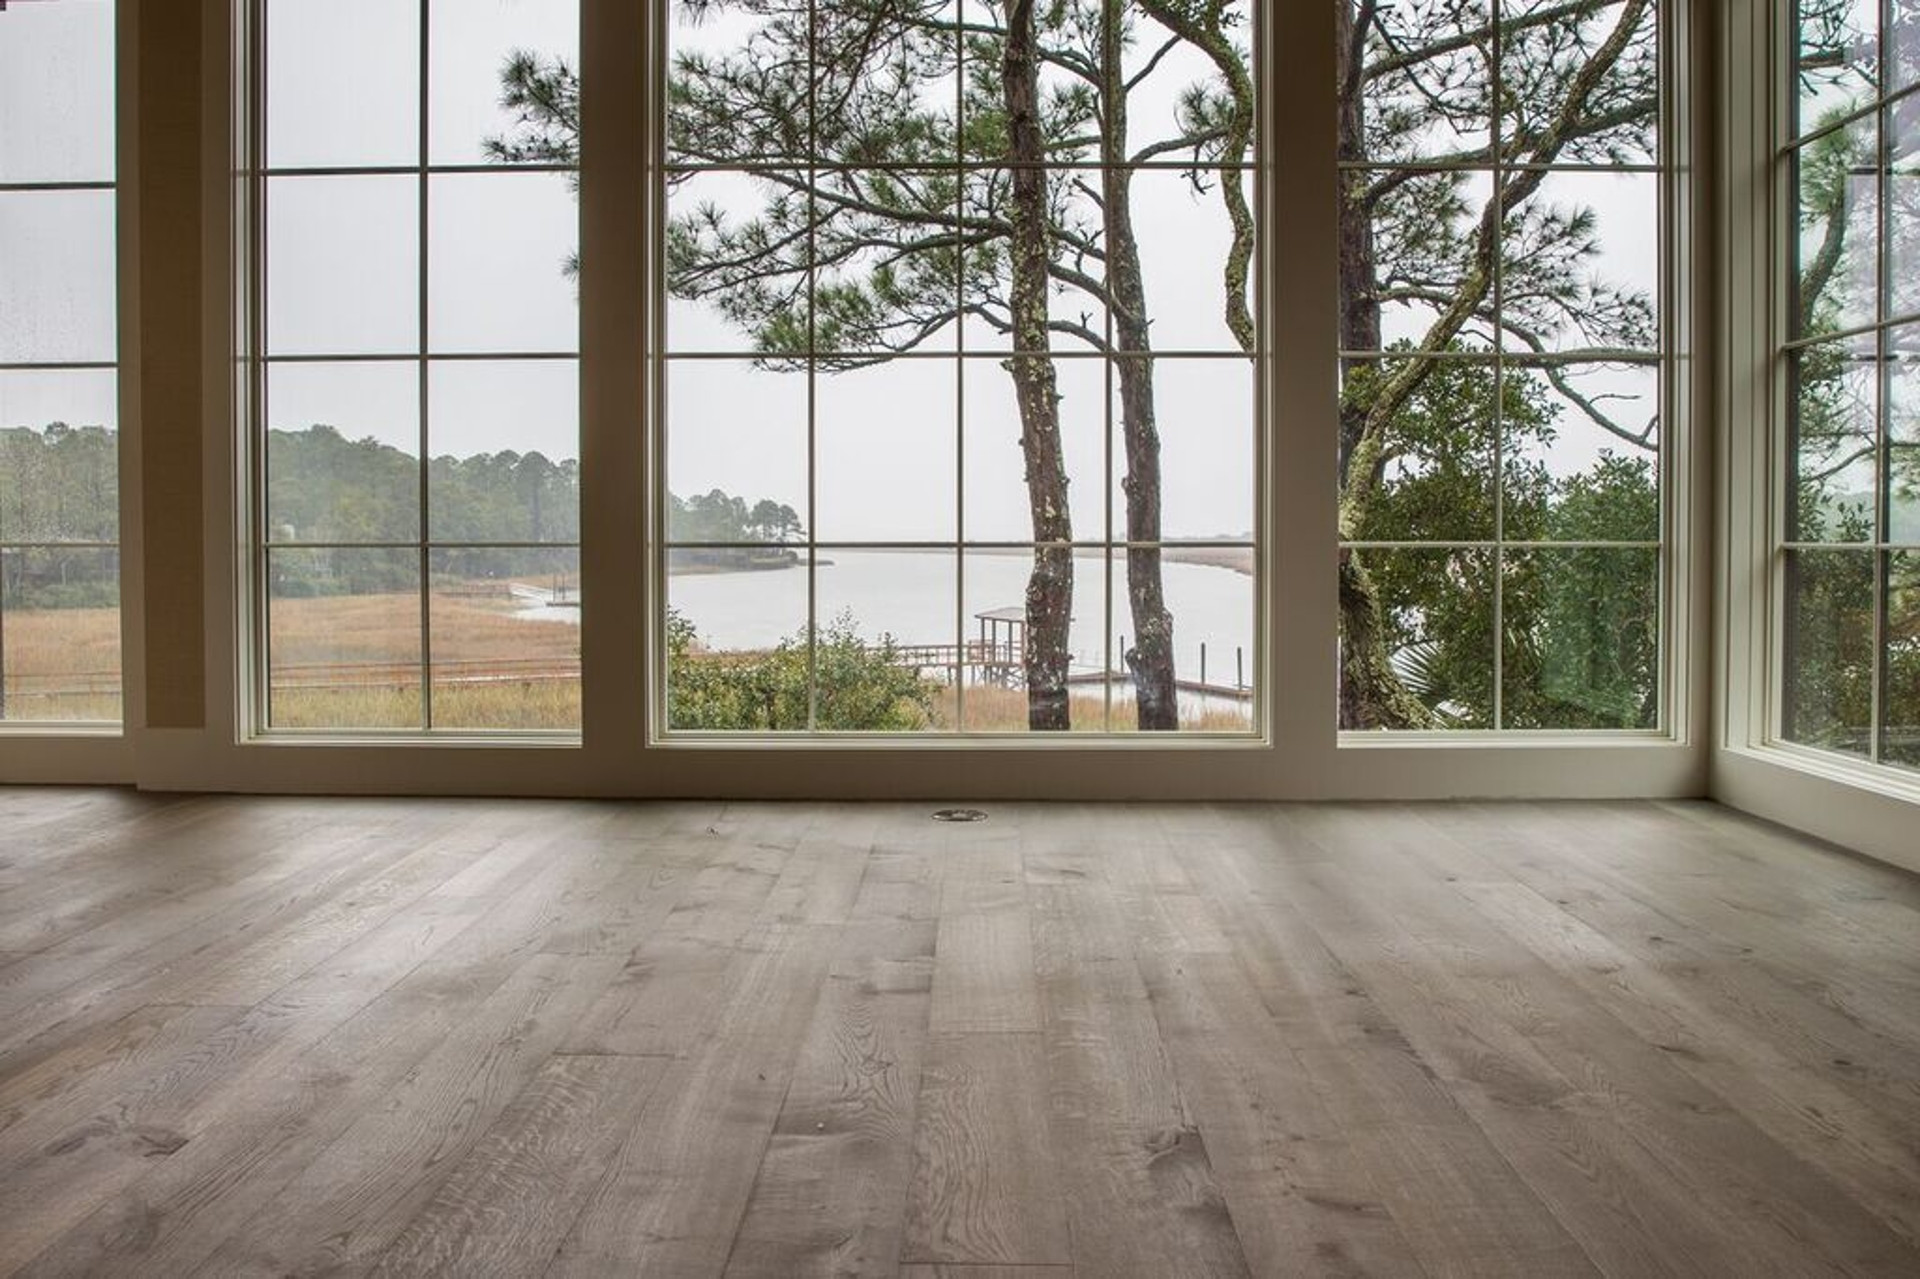 john griffiths hardwood flooring charleston sc of beautiful weathered floors for a beach house lighthouse plank floors throughout carousel unspecified 9 70b91